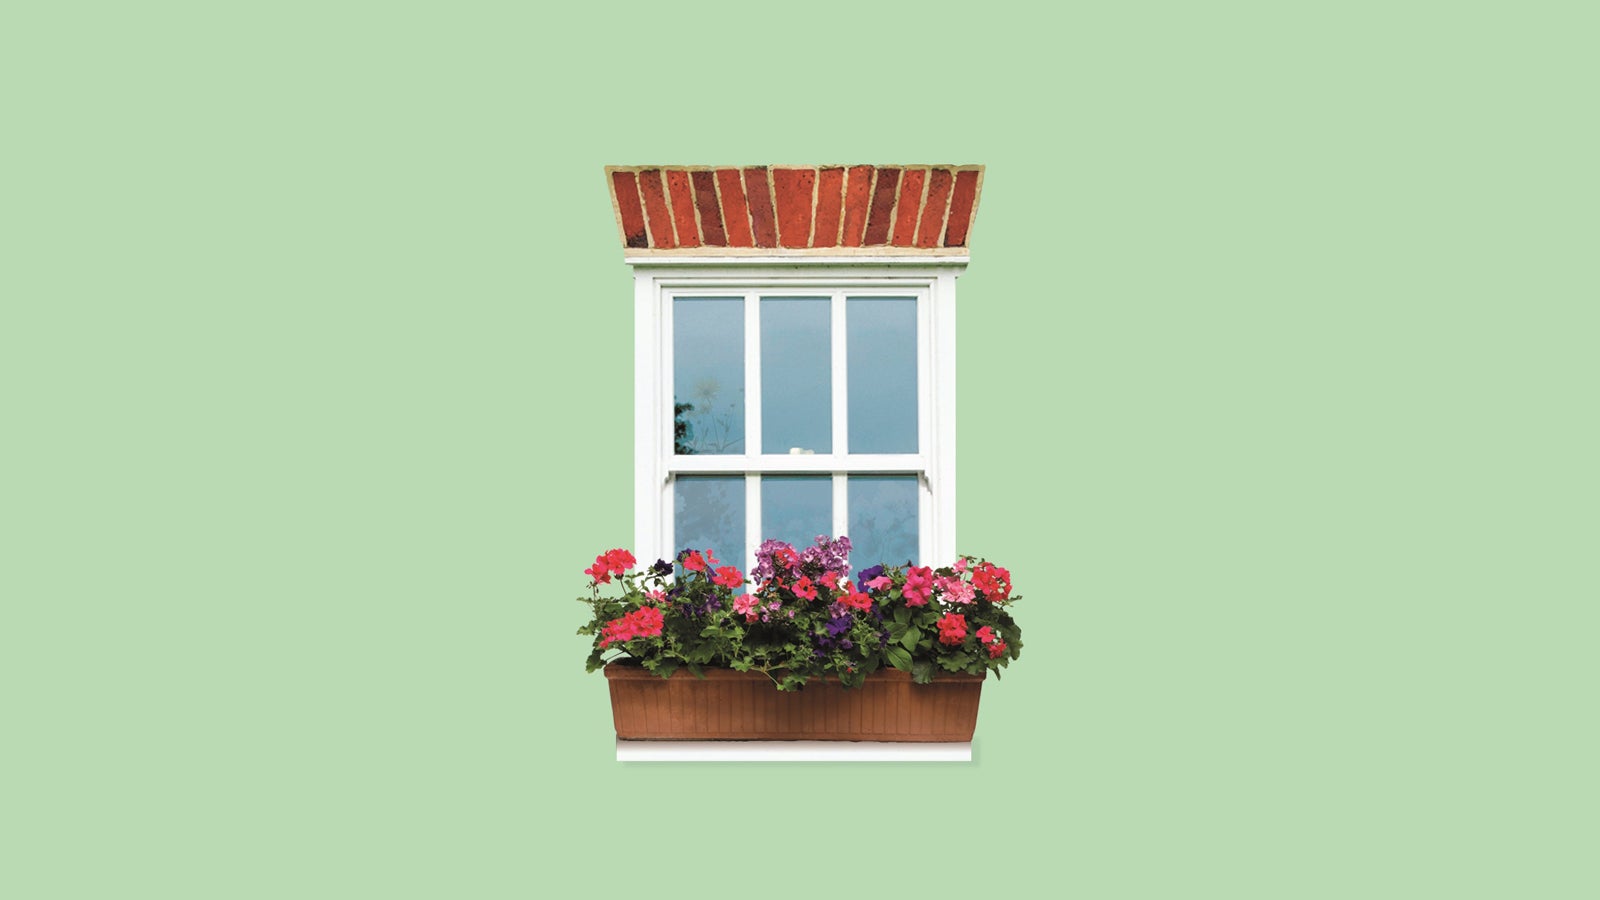 A green background with a window and a windowbox full of flowers. Illustration taken from the jacket of An Unsuitable Match by Joanna Trollope.